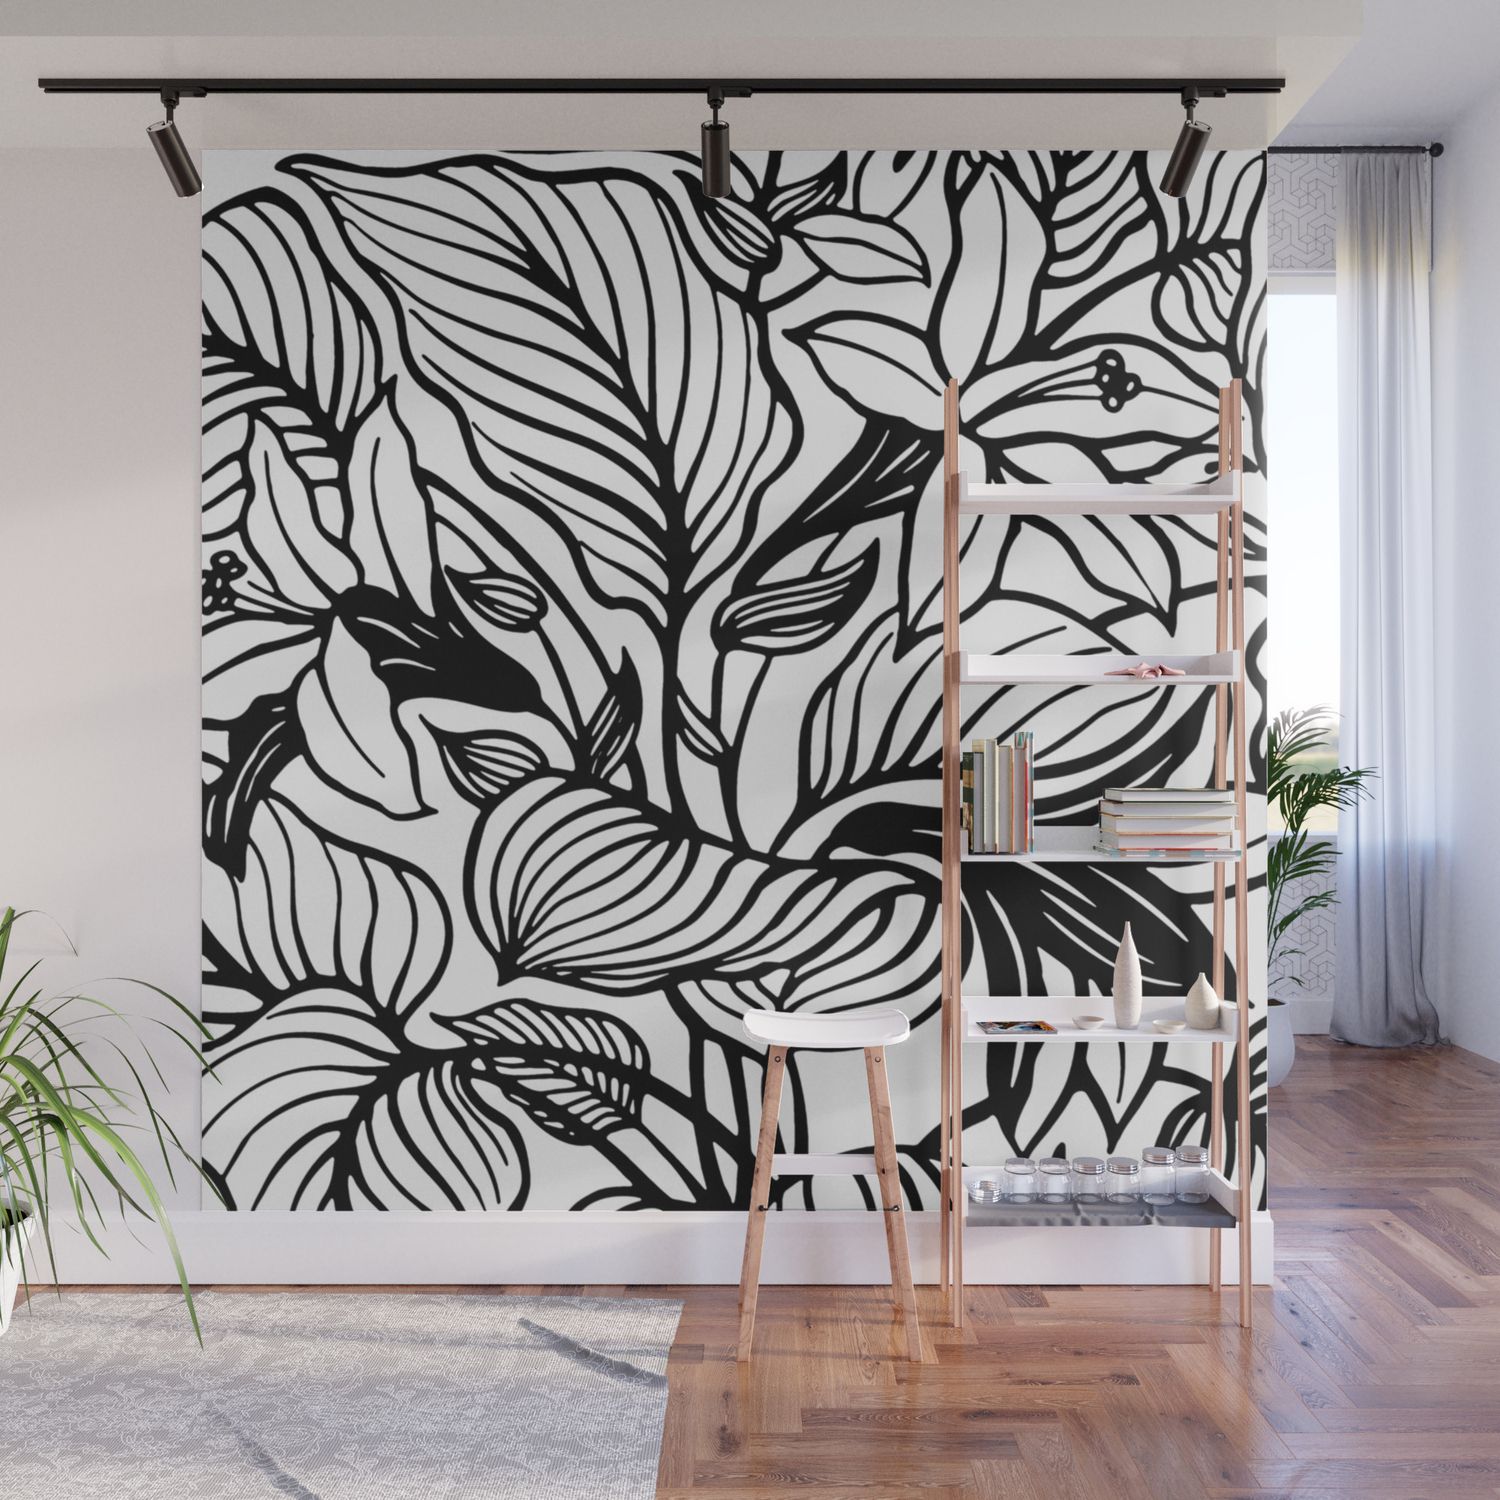 White And Black Floral Minimalist Line Drawing Wall Muralbeautiful  Homes Usa | Society6 Within Latest Black Minimalist Wall Art (View 13 of 20)